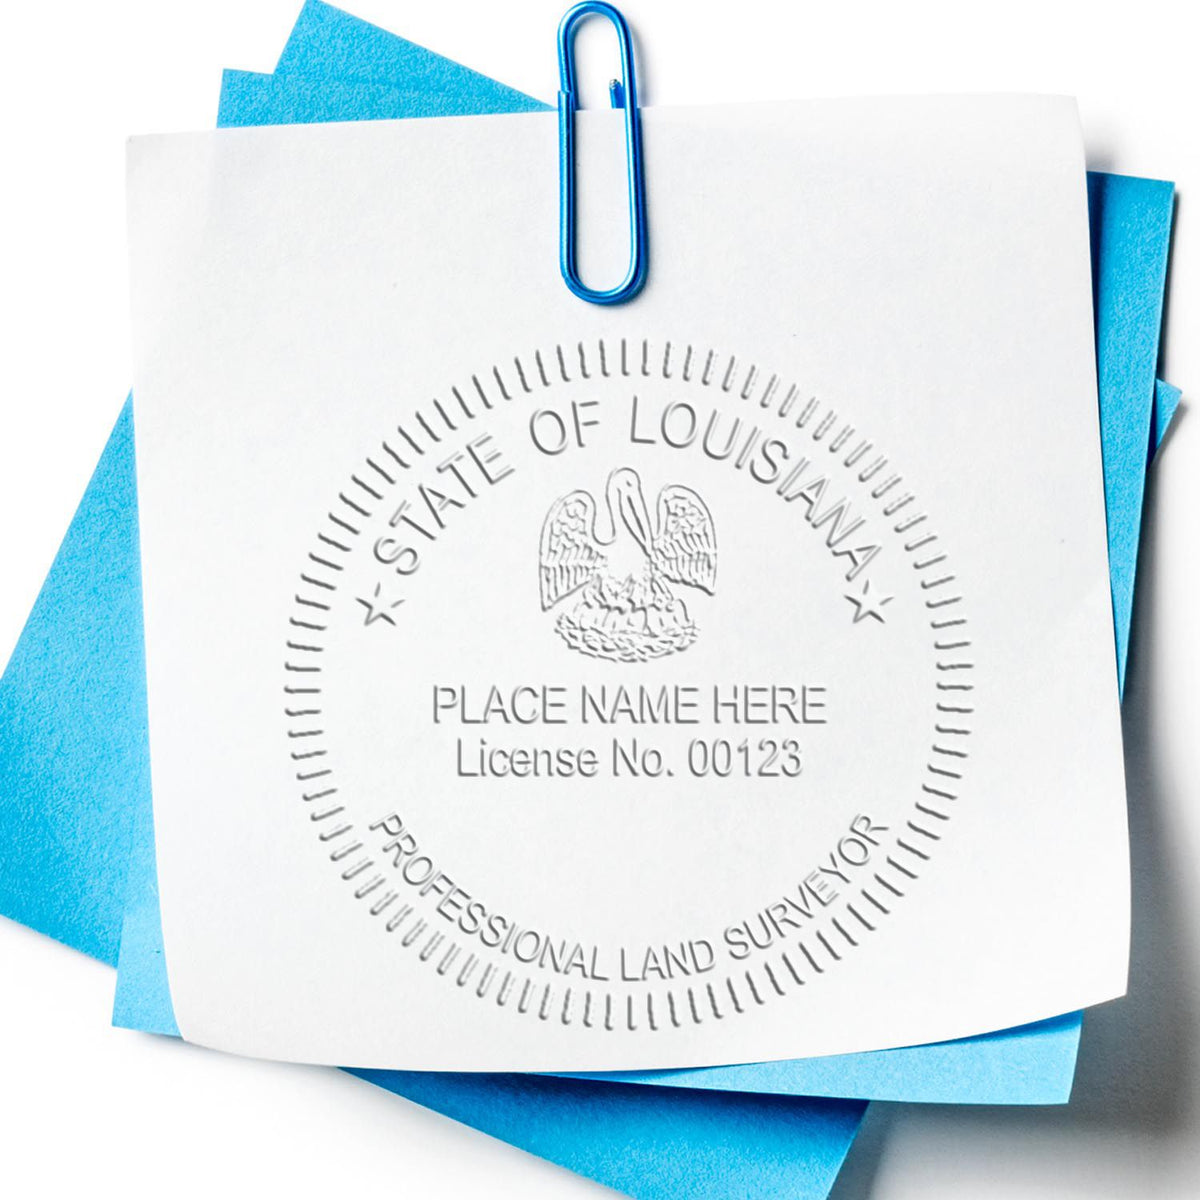 A photograph of the Hybrid Louisiana Land Surveyor Seal stamp impression reveals a vivid, professional image of the on paper.